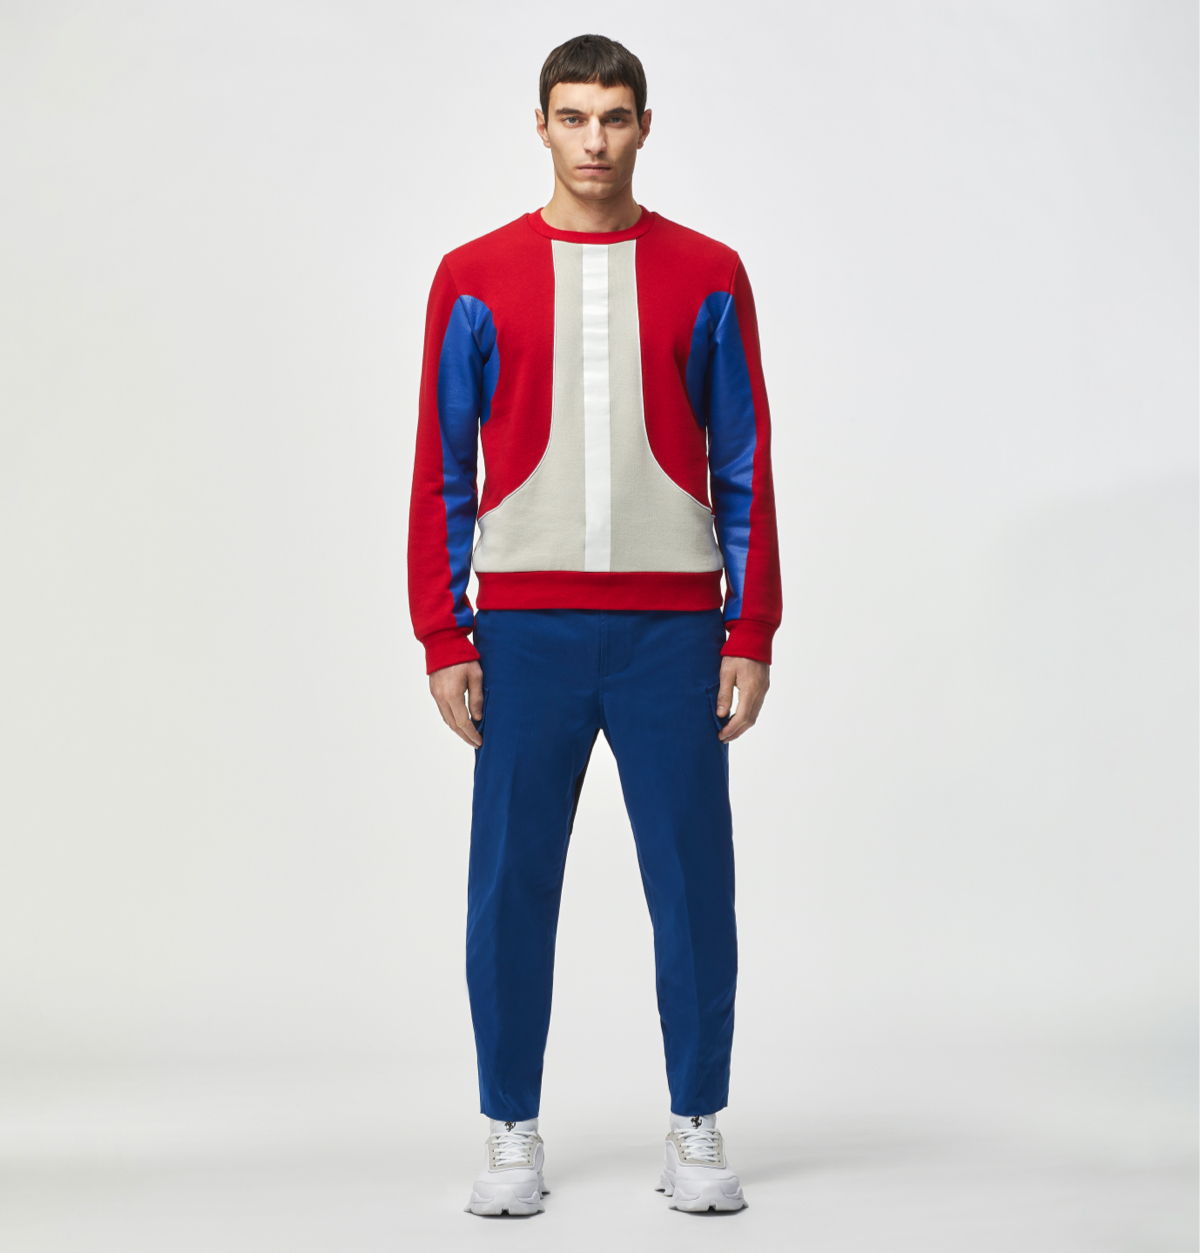 Model wearing a red jumper with blue trousers and white sneakers